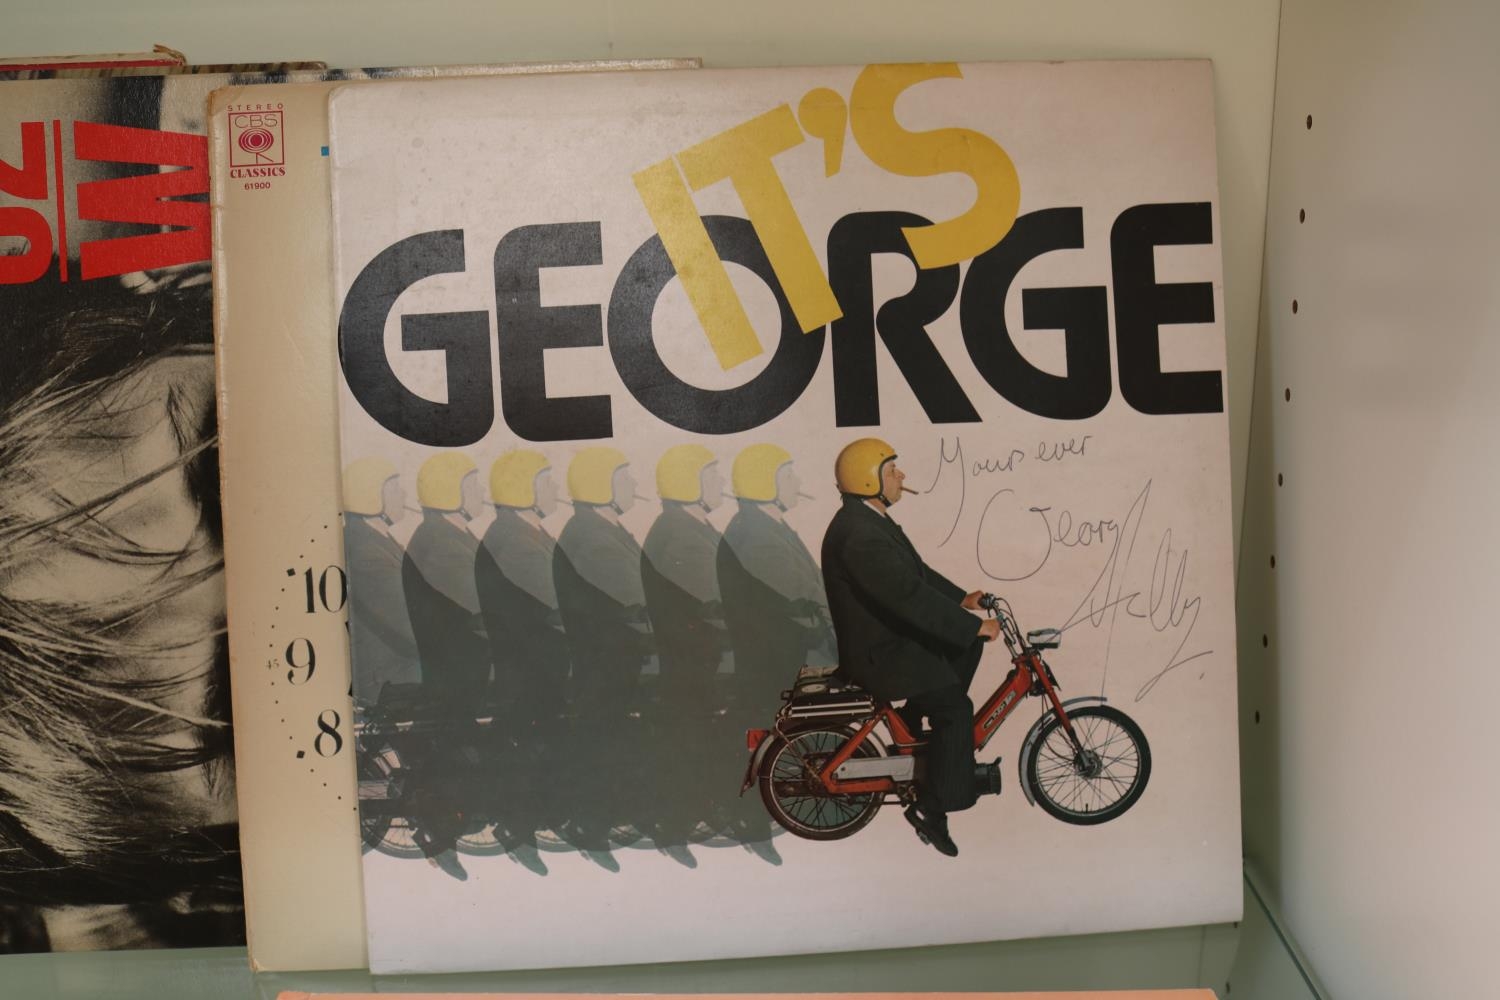 Collection of Vinyl Records inc. The Beatles, Joni Mitchell, George Melly signed record etc - Image 3 of 3